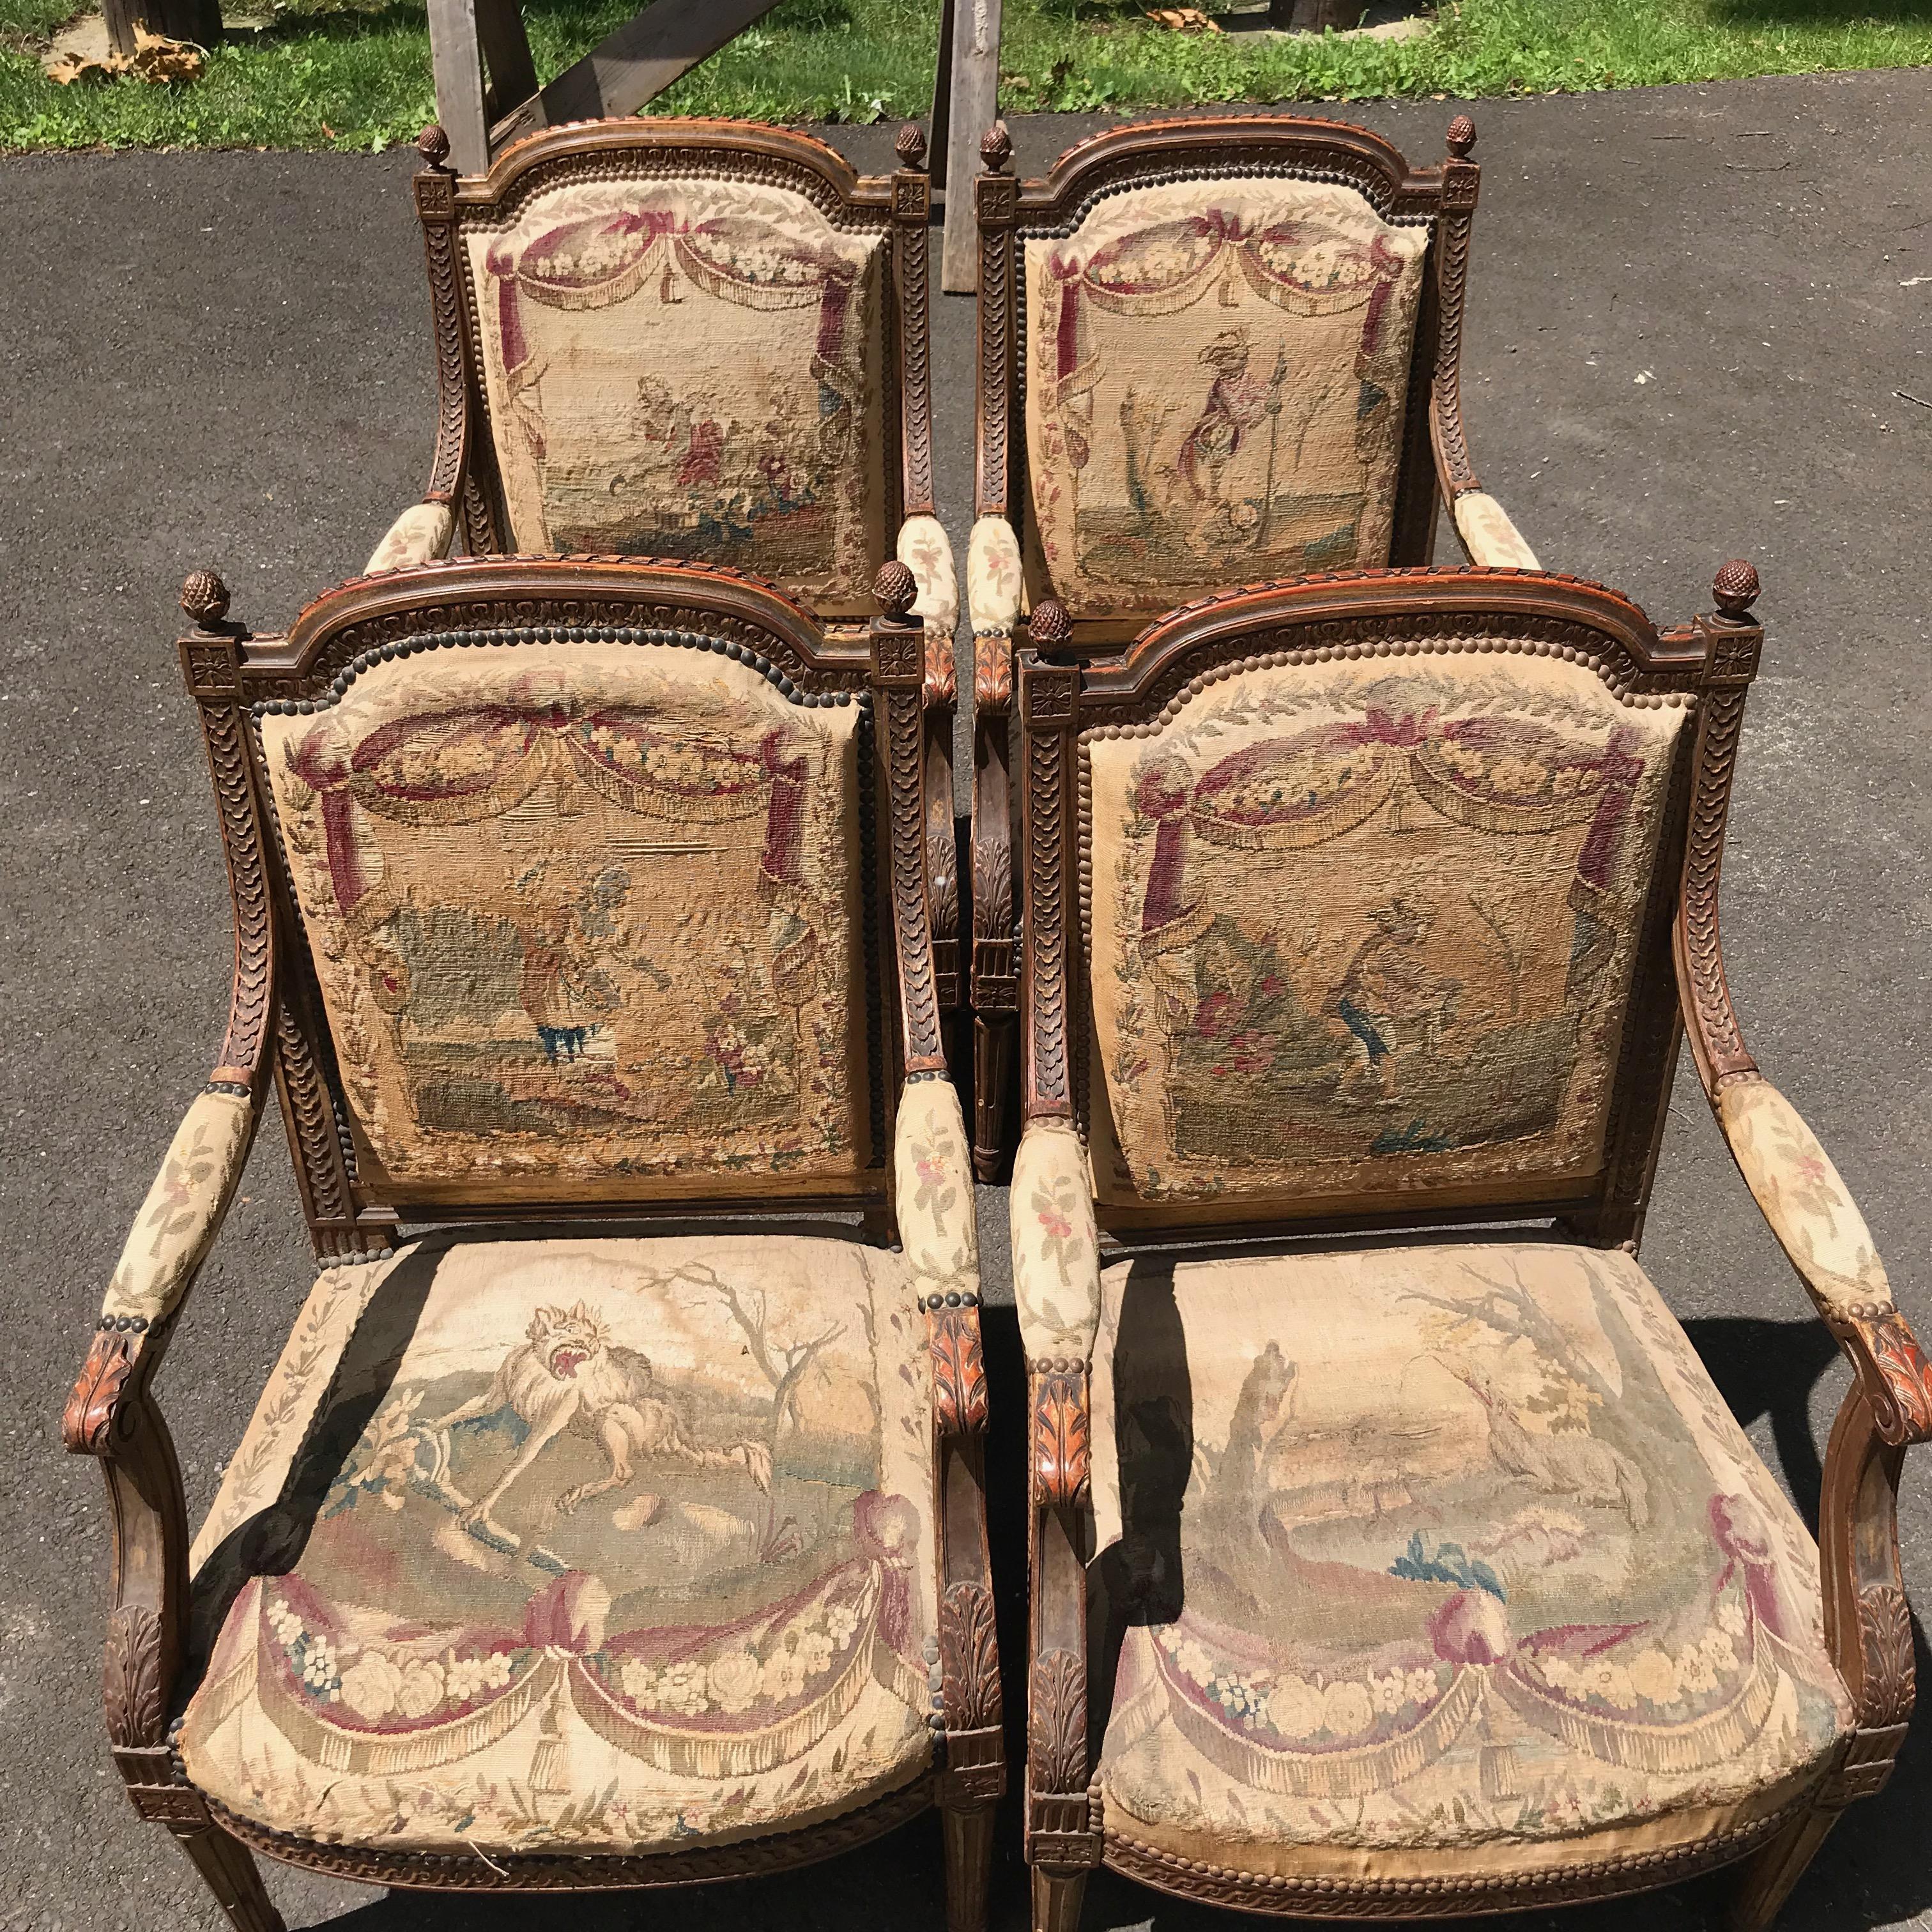 A pair of Louis XVI Fauteuils carved and gilded wood, decoration with floral motifs. Upholstered backs and seats with Aubusson tapestry, depicting La Fontaine fables (possibly from the 18th century), France, 19th century. Losses and defects.